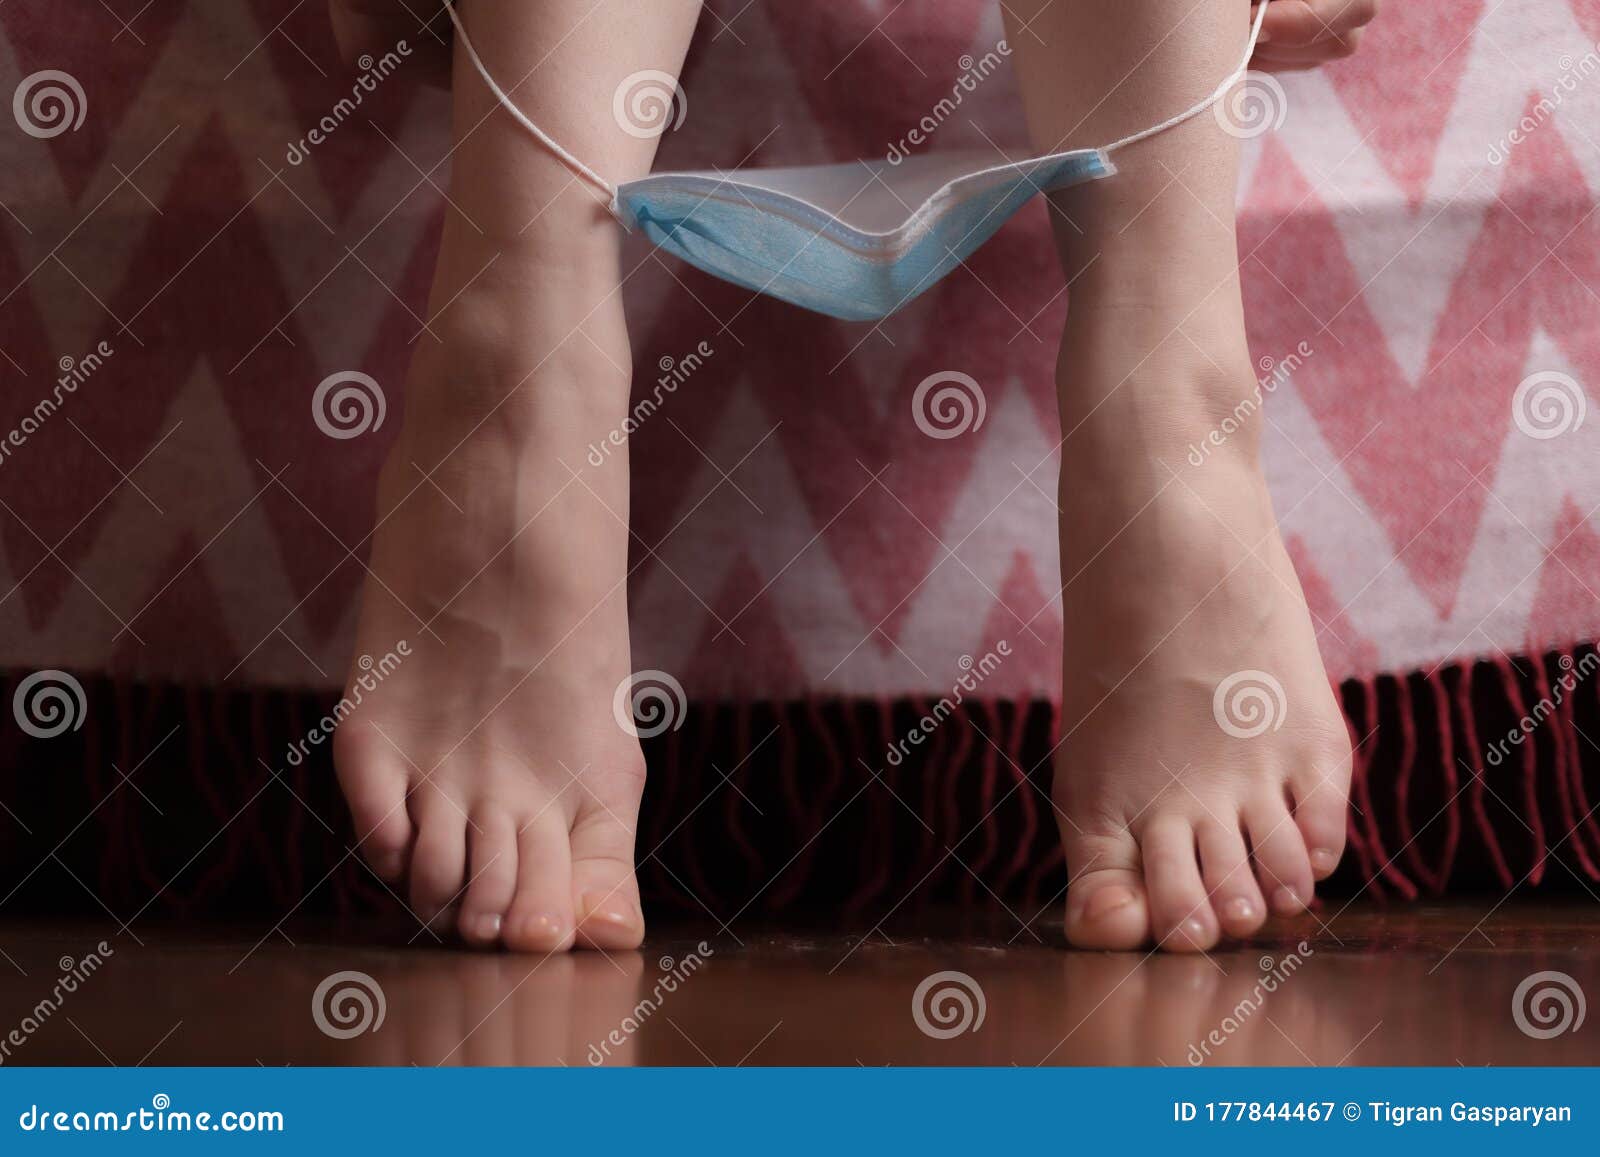 Woman with pink toenails taking off panties Stock Photo by